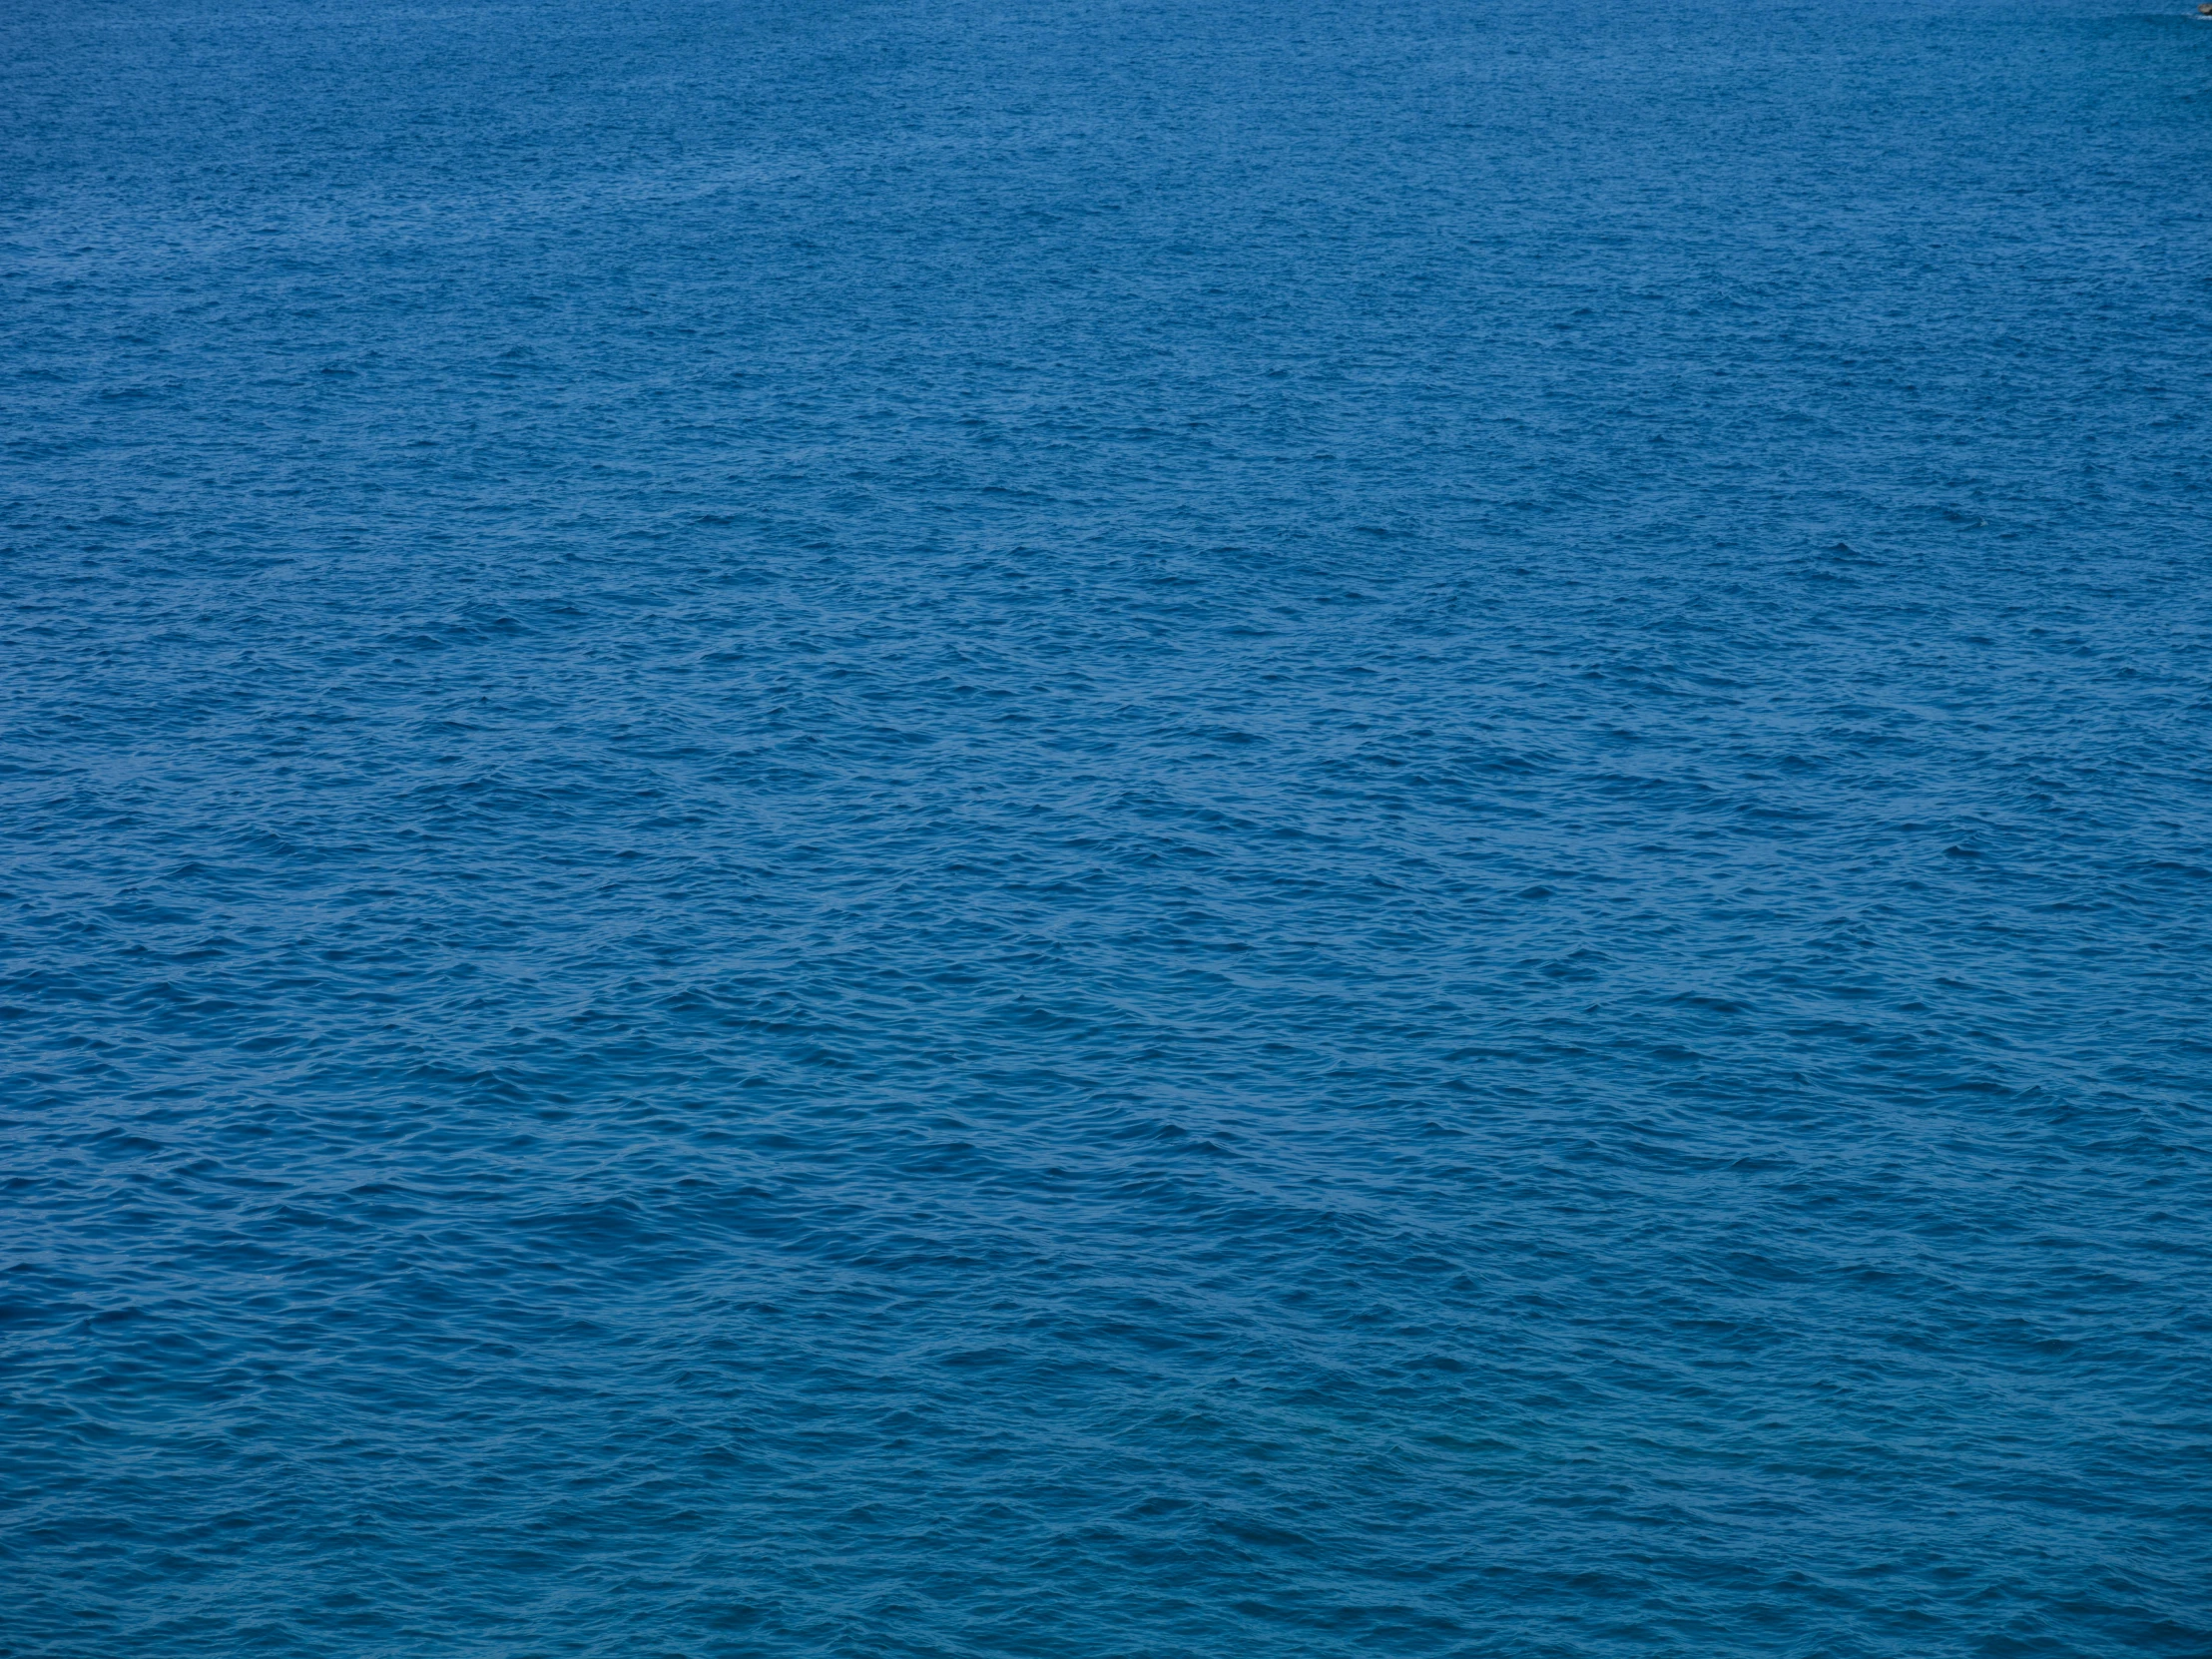 a lone boat on a blue body of water